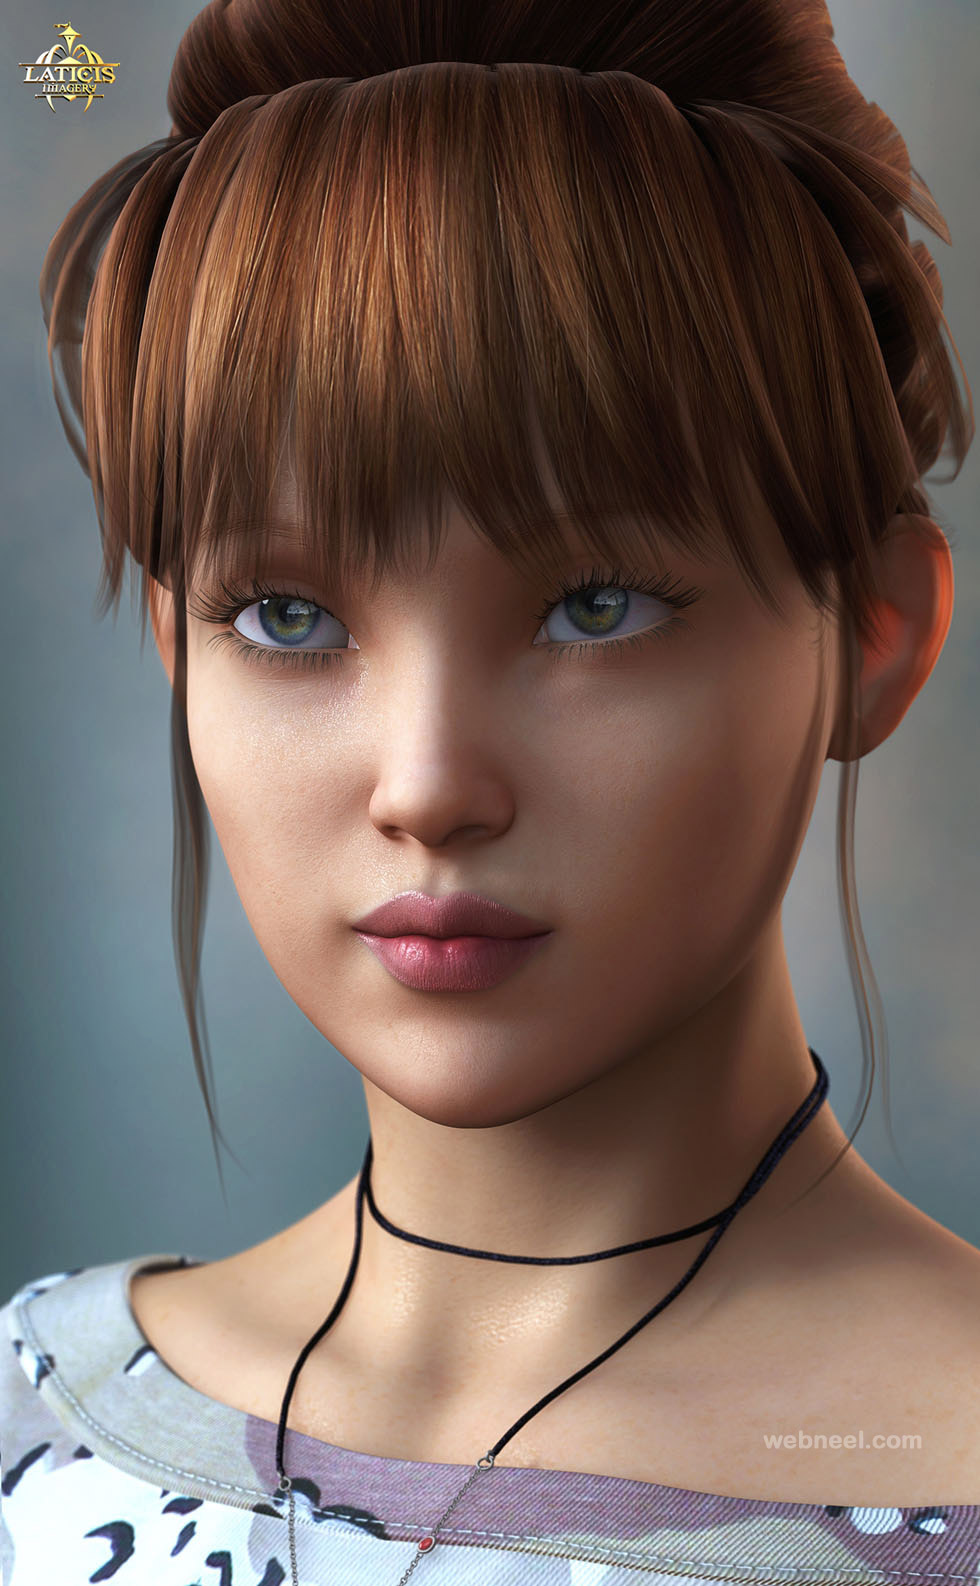 25 Awesome 3D Models and Girl Character Designs for your inspiration